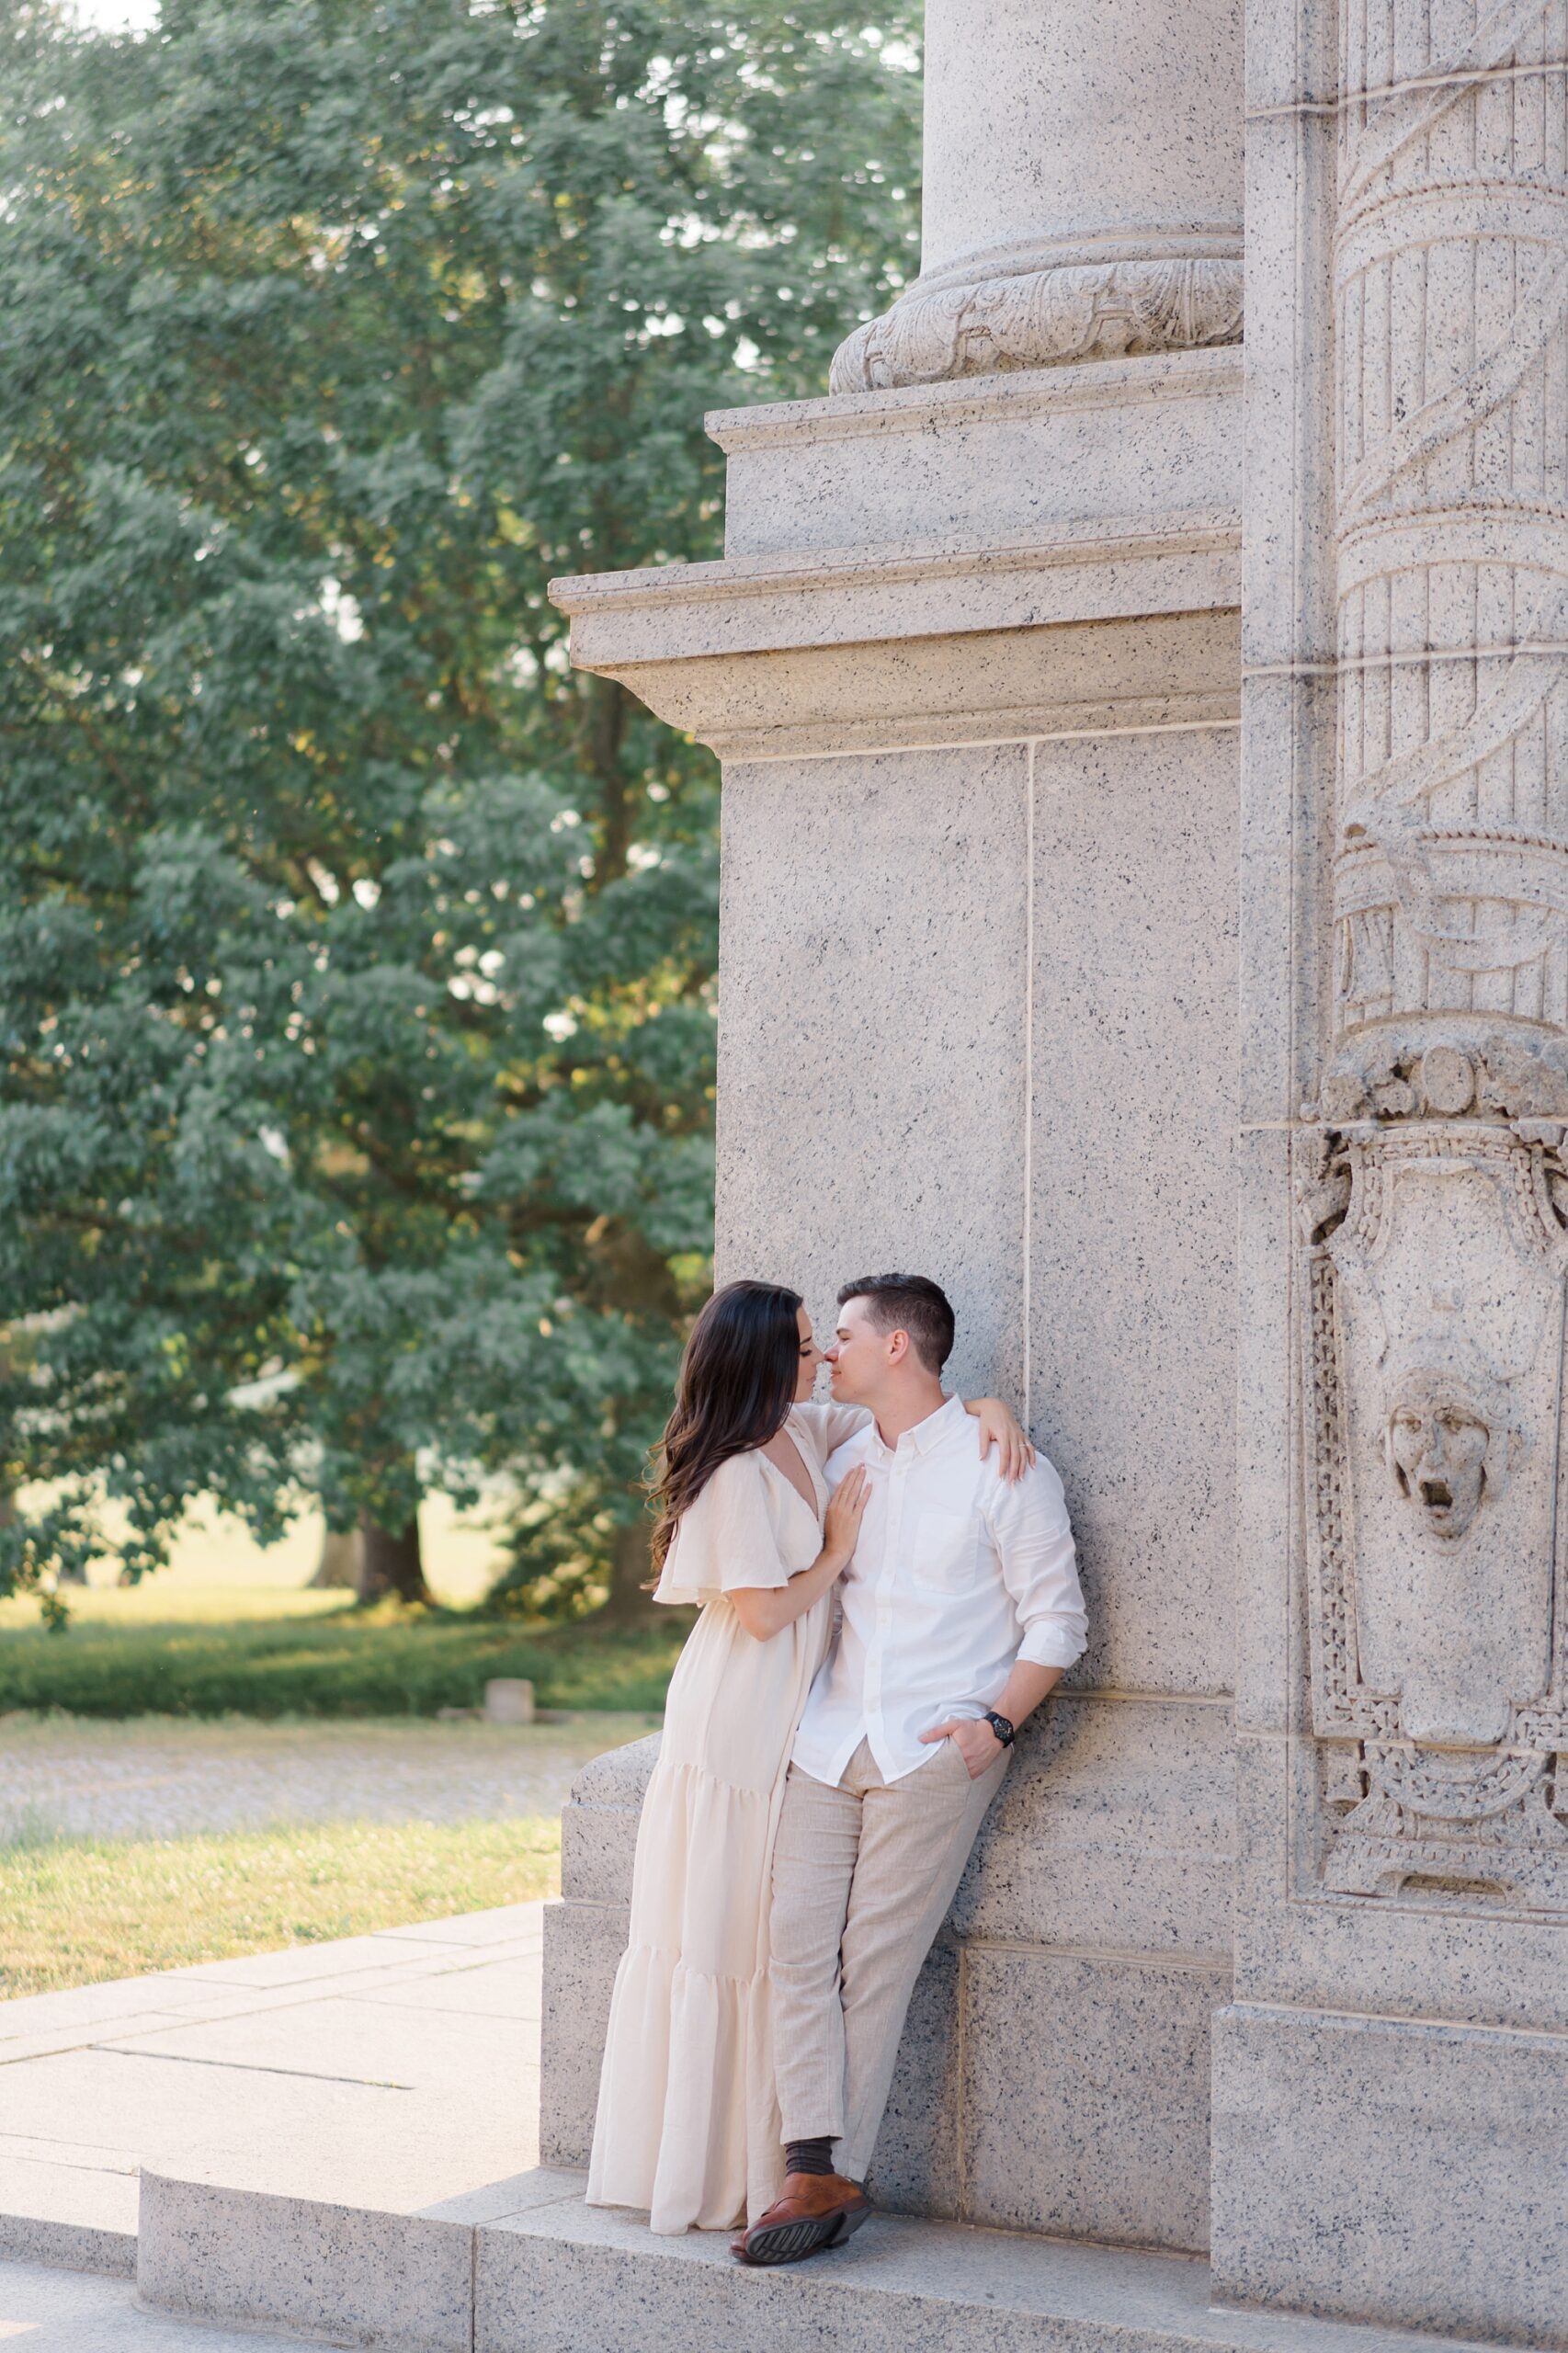 classic engagement portraits captured by timeless photographer Amber Dawn